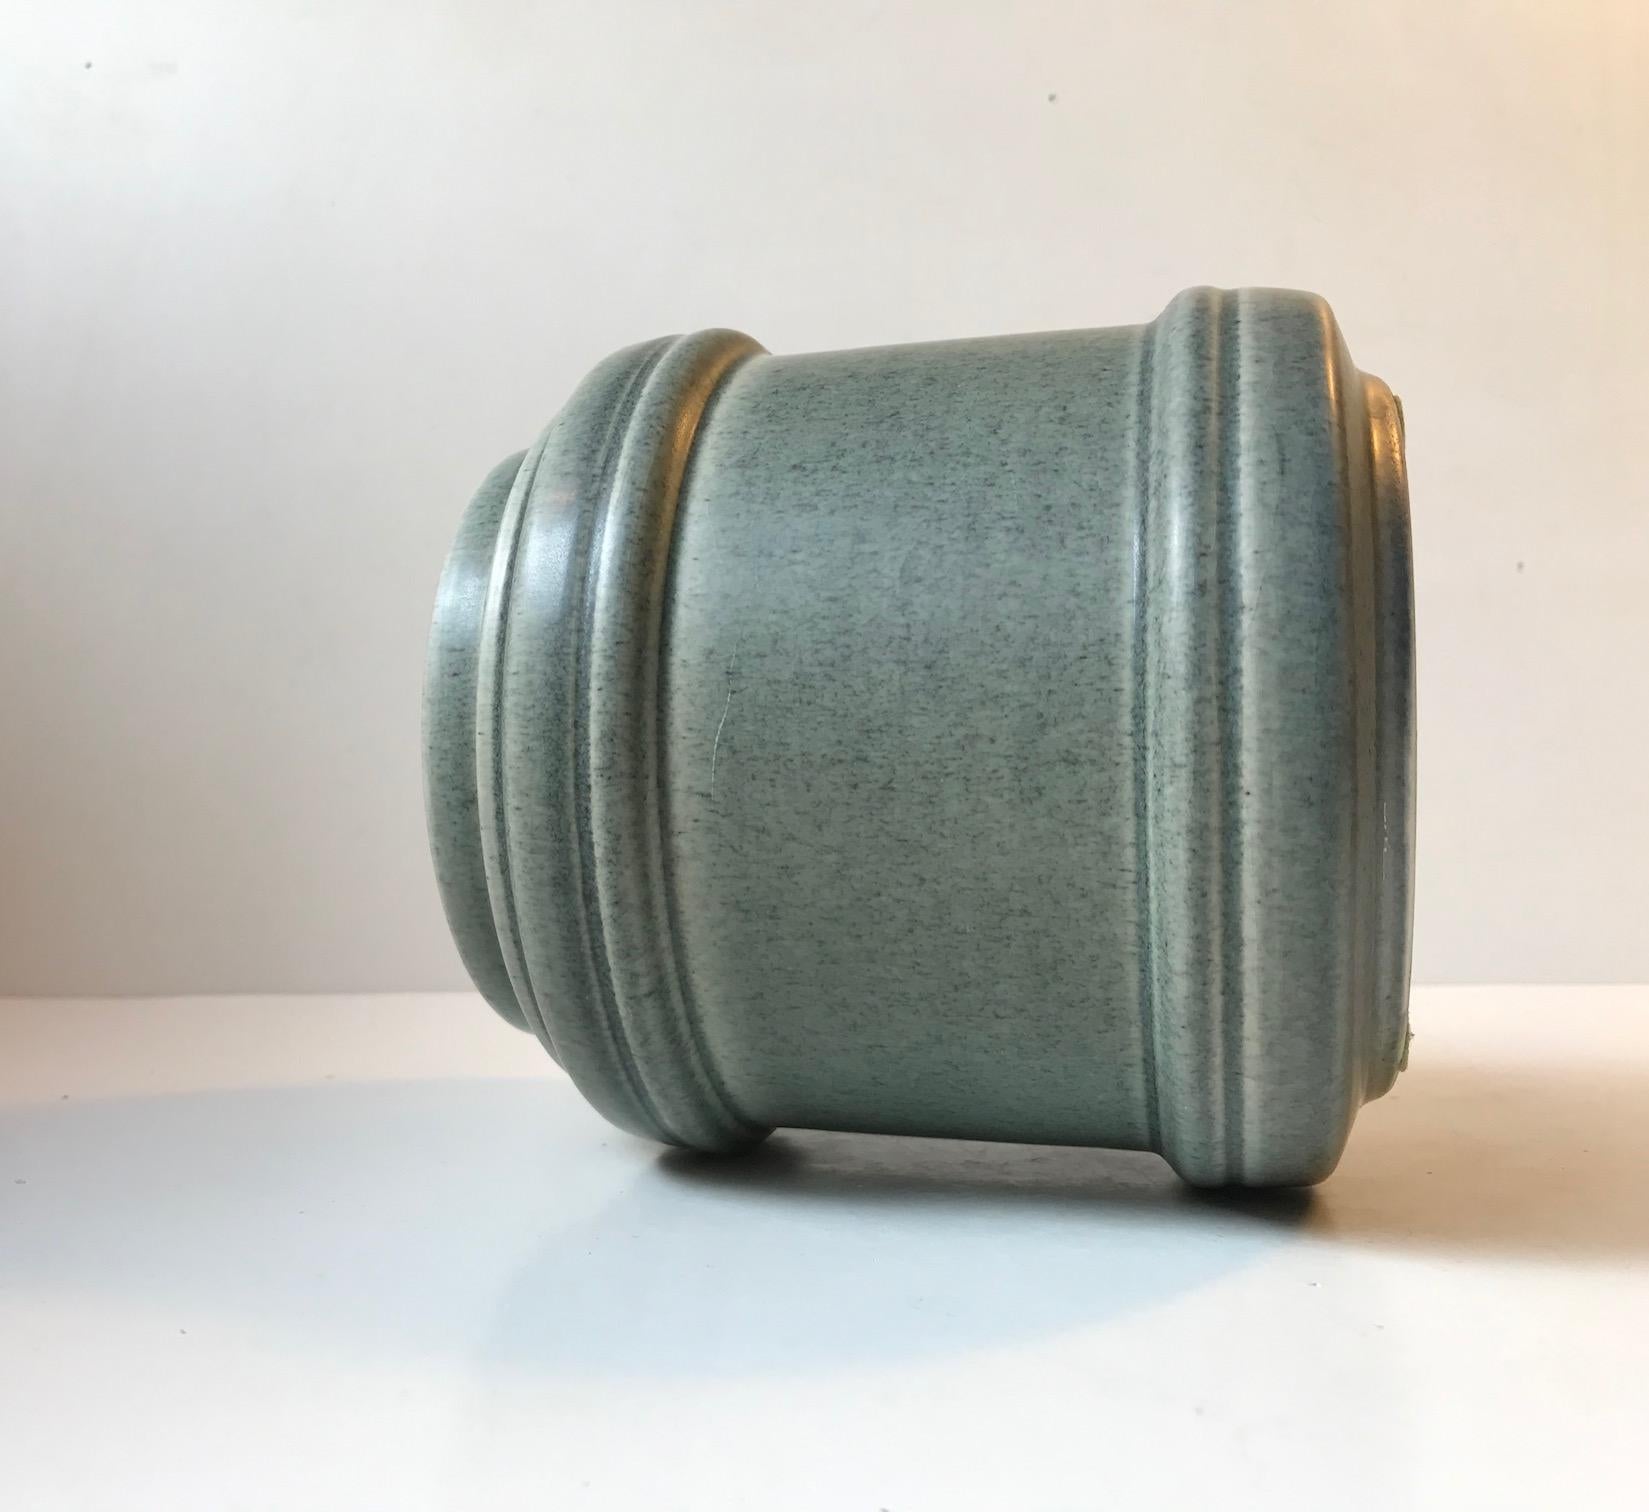 Berndt Friberg inspired ceramic vase with architectural features and soft dusty blue glaze. Designed by Danish Ceramist Einar Johansen during the 1960s before he started as chief designer at Søholm Keramik. It is signed EJO to the base. This color